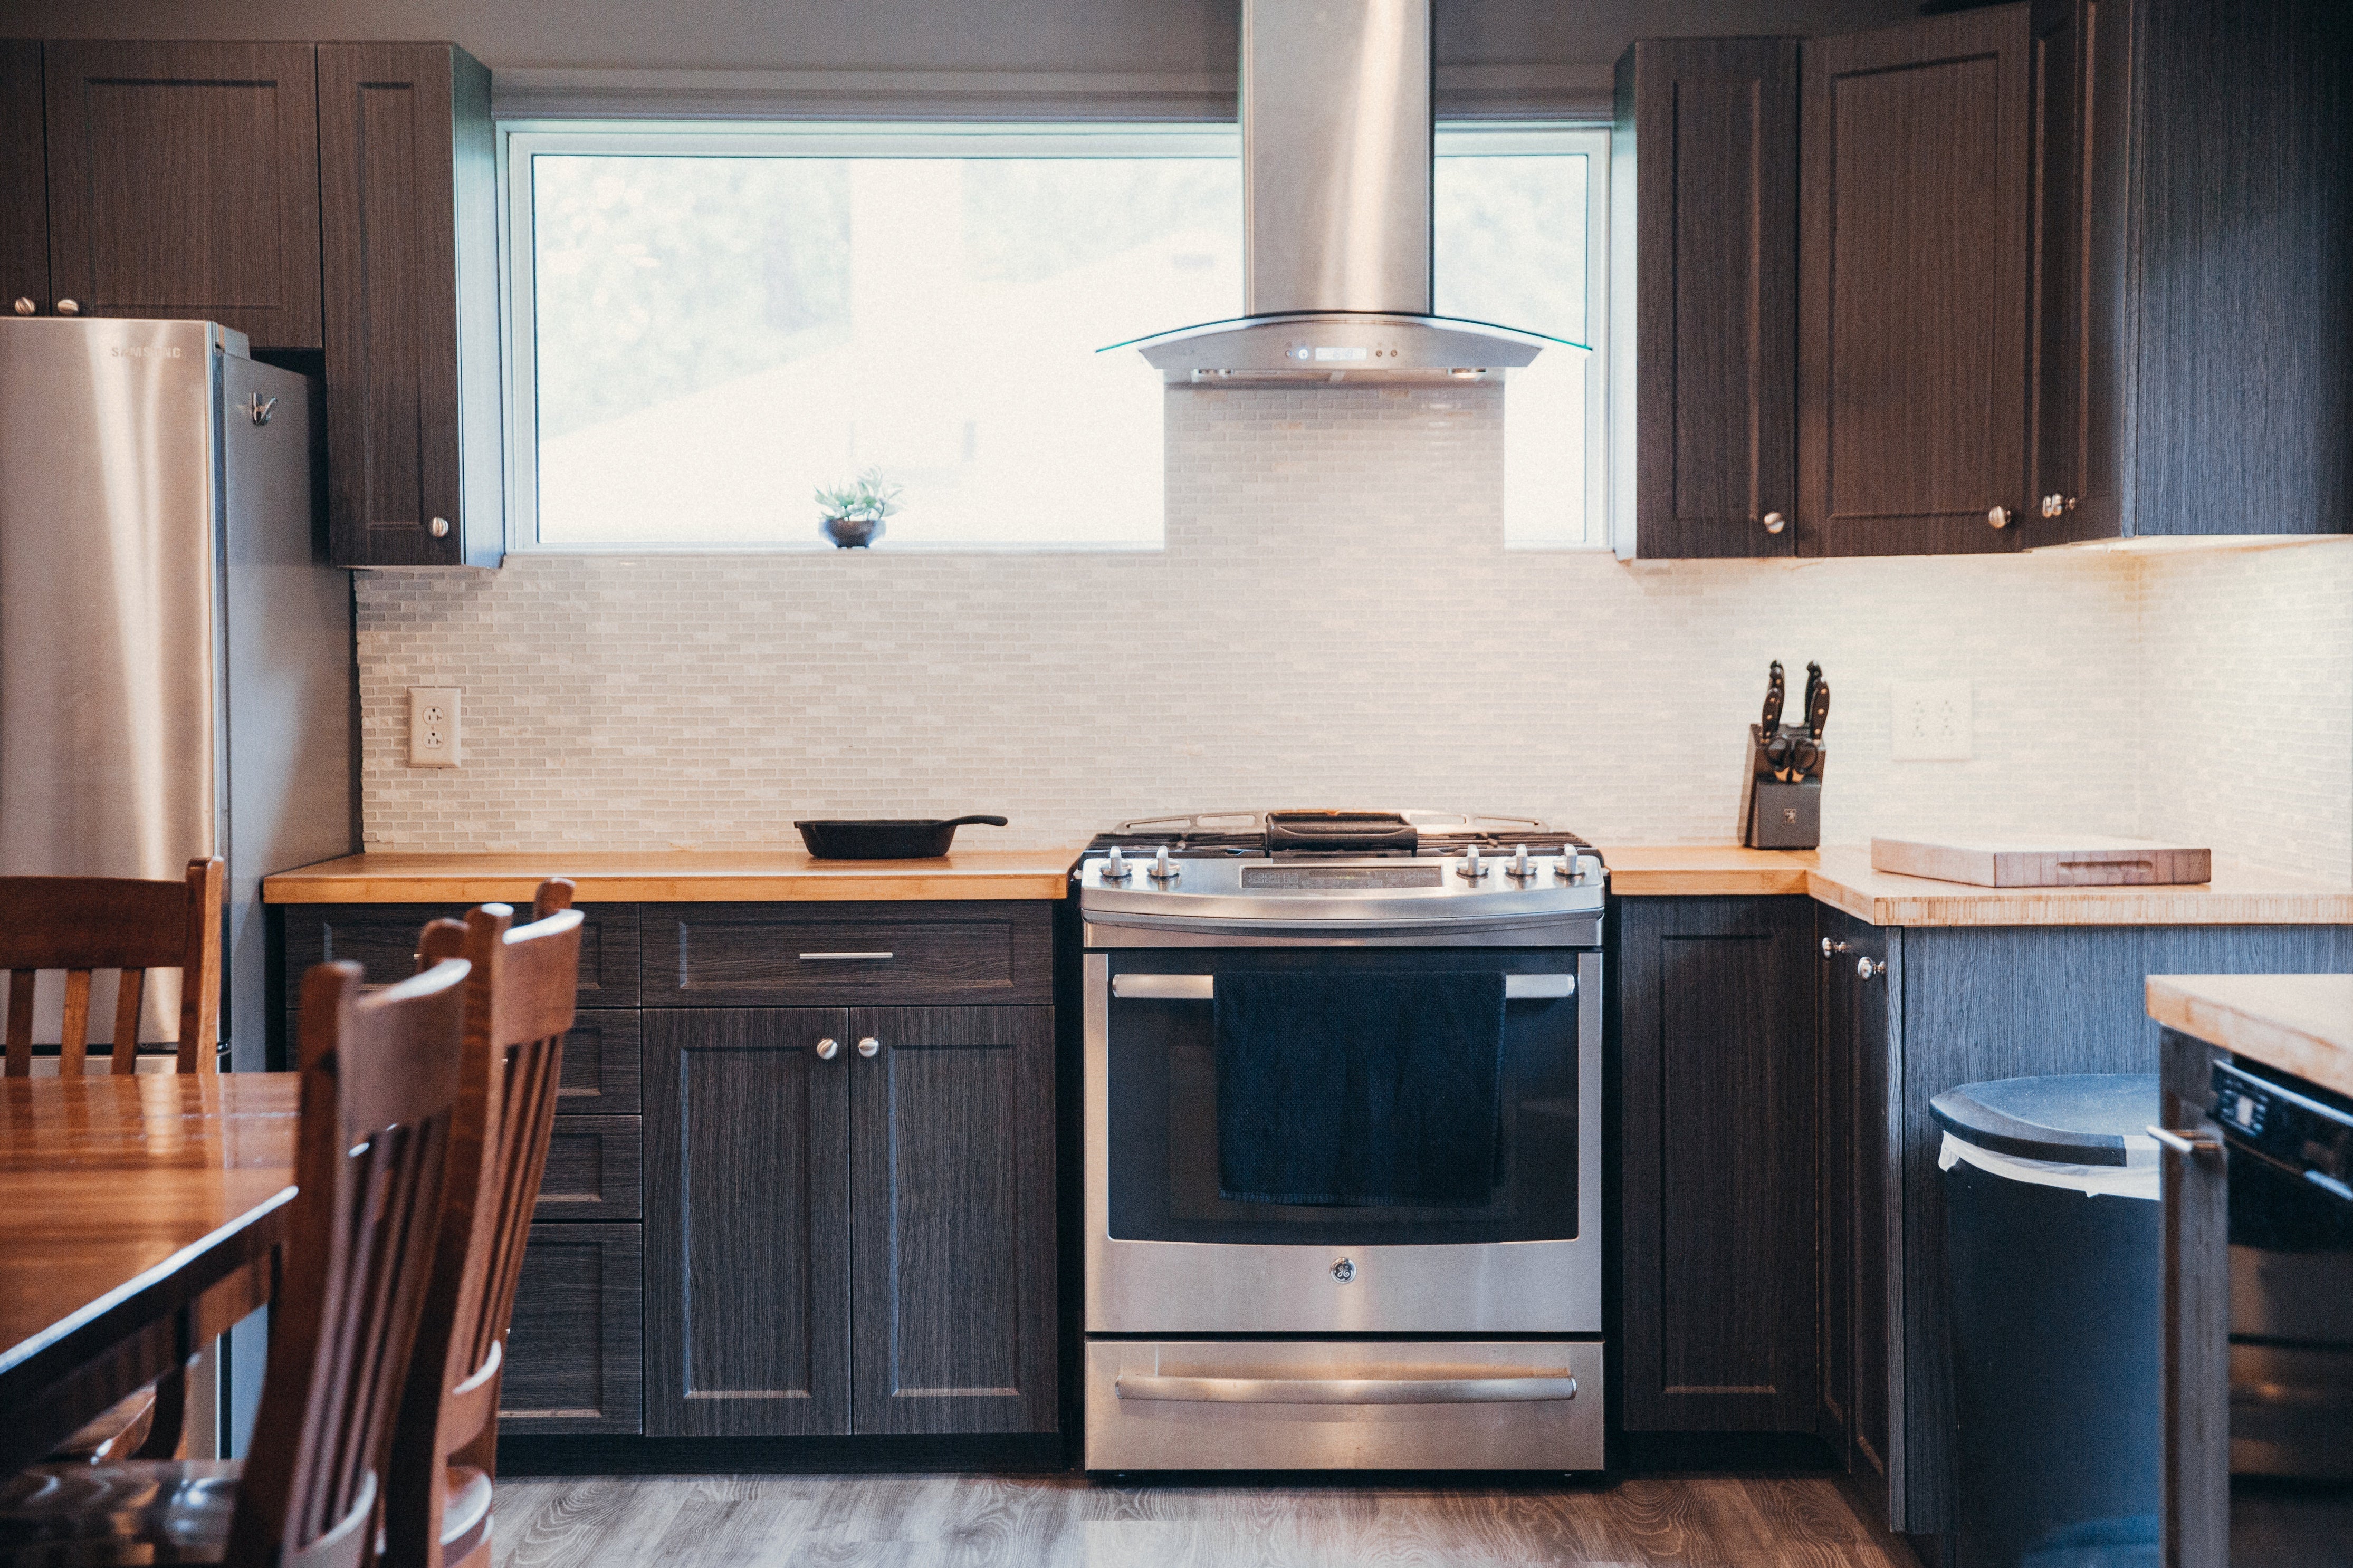 Cooking with a new stove or appliance can be an empowering experience that allows you to showcase your culinary skills in the kitchen